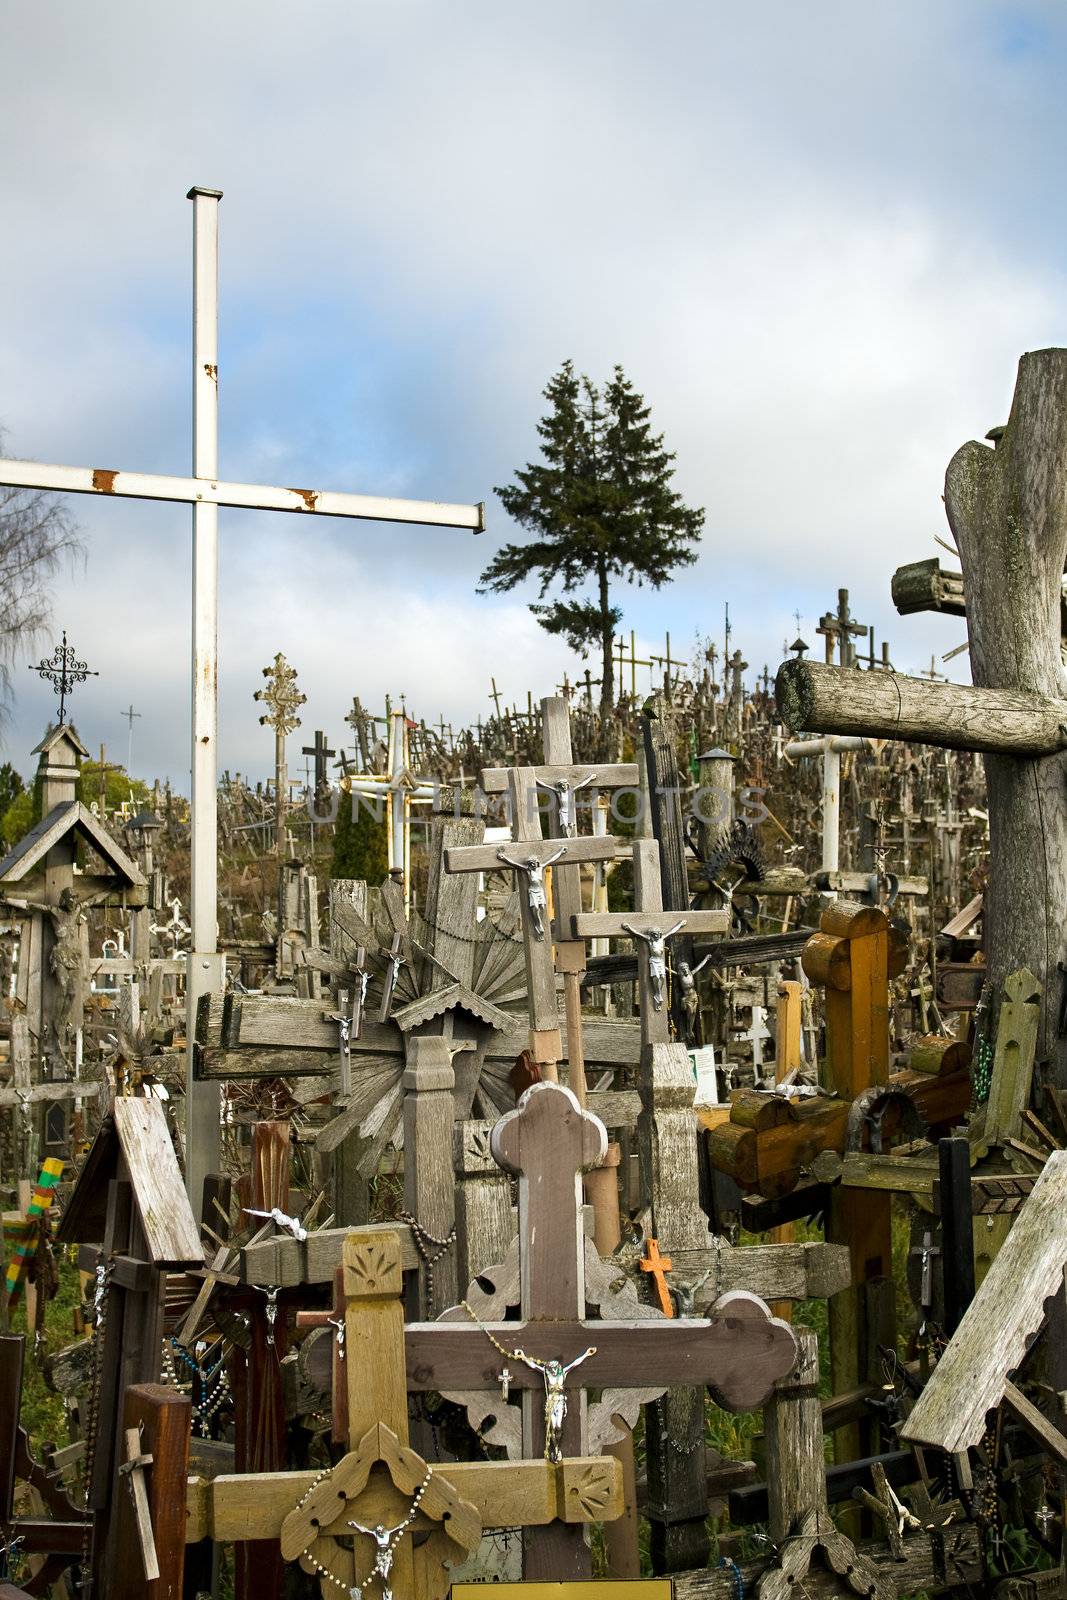 The Hill of Crosses is a site of pilgrimage near the city of Siauliai, in Lithuania, Europe